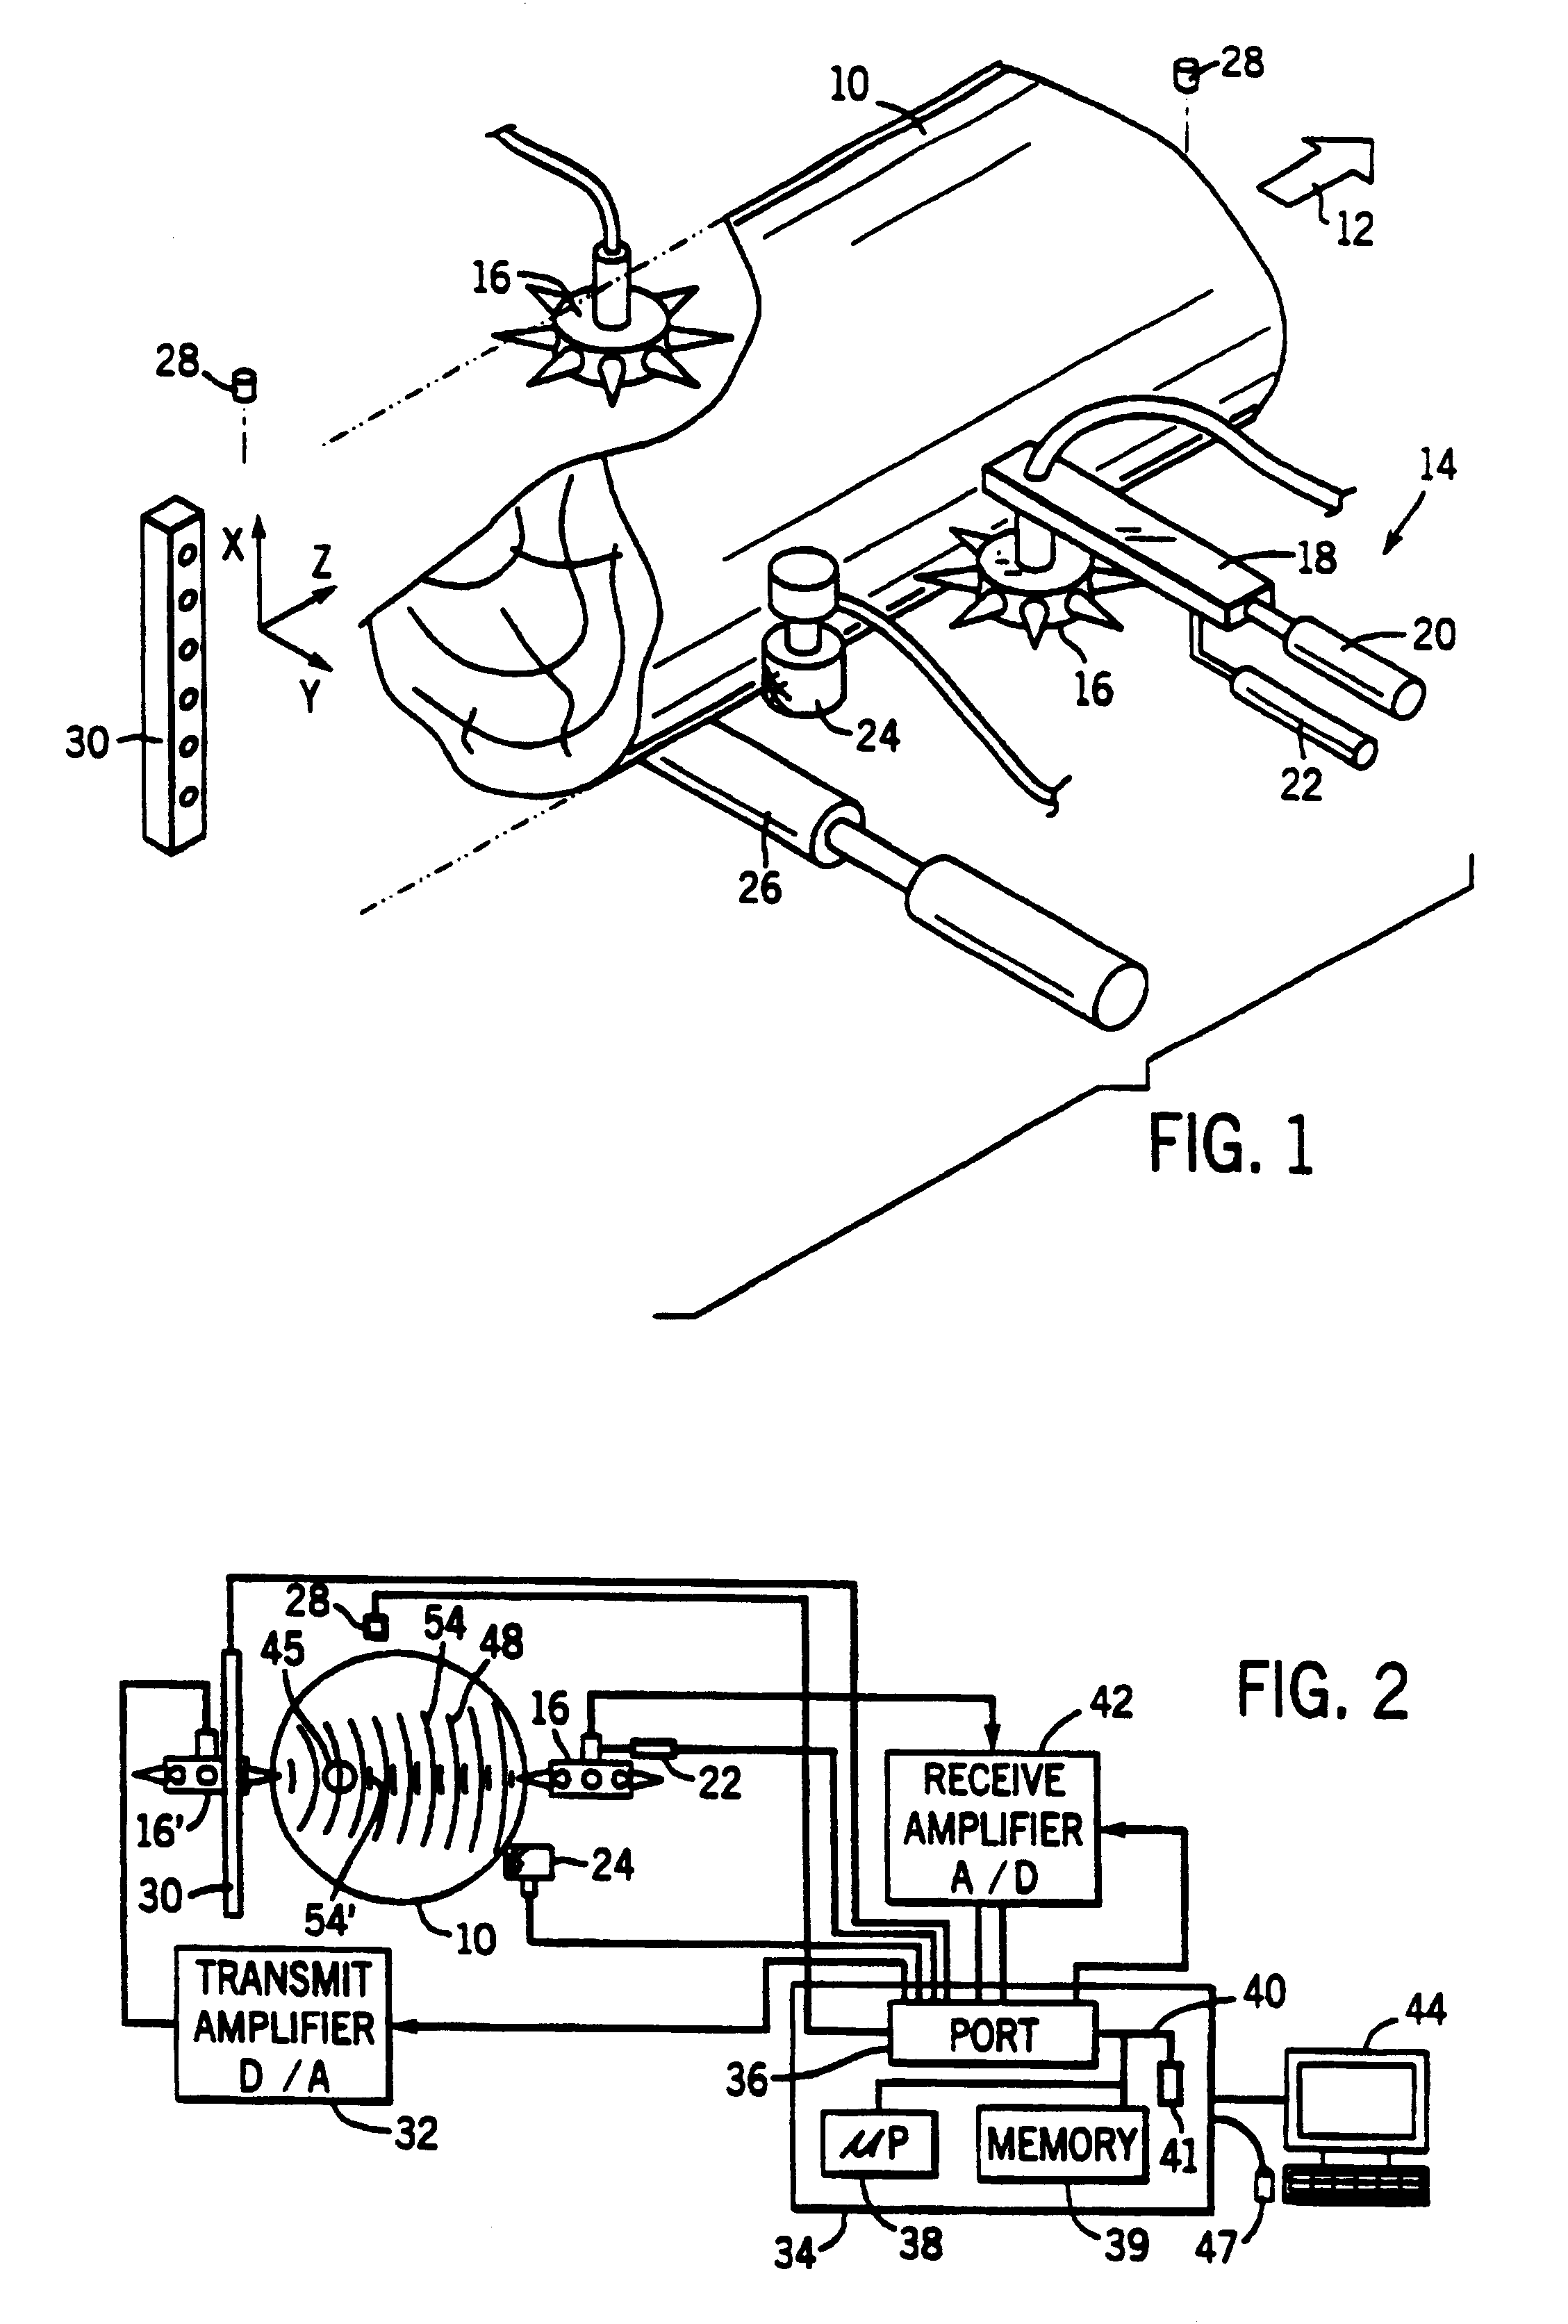 Method and apparatus for on-line monitoring of log sawing